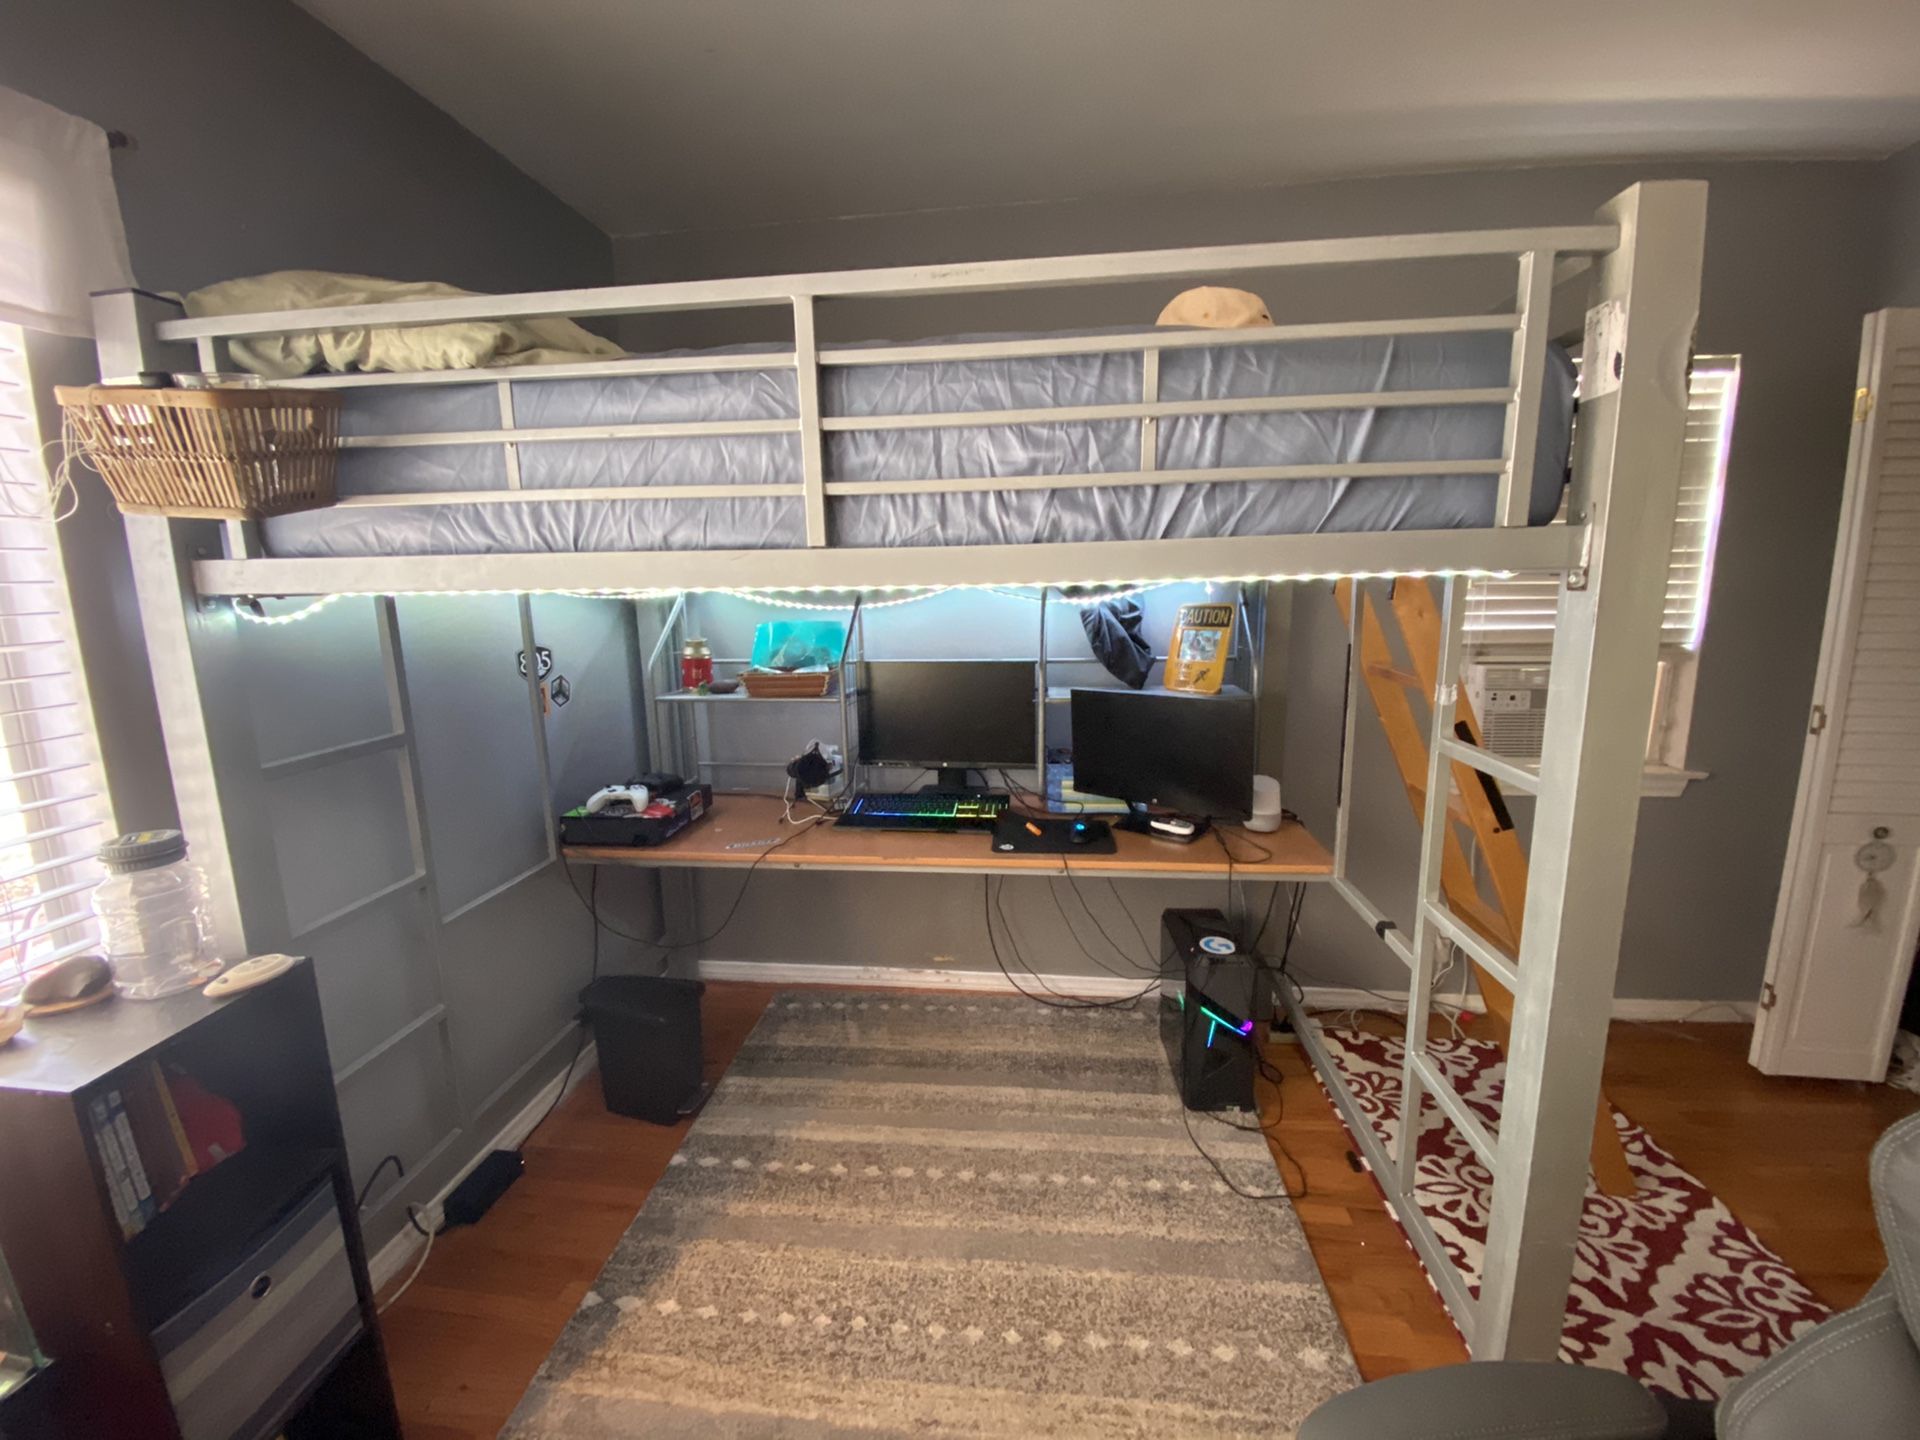 Loft bed with desk - Full *ON HOLD - PENDING SALE*